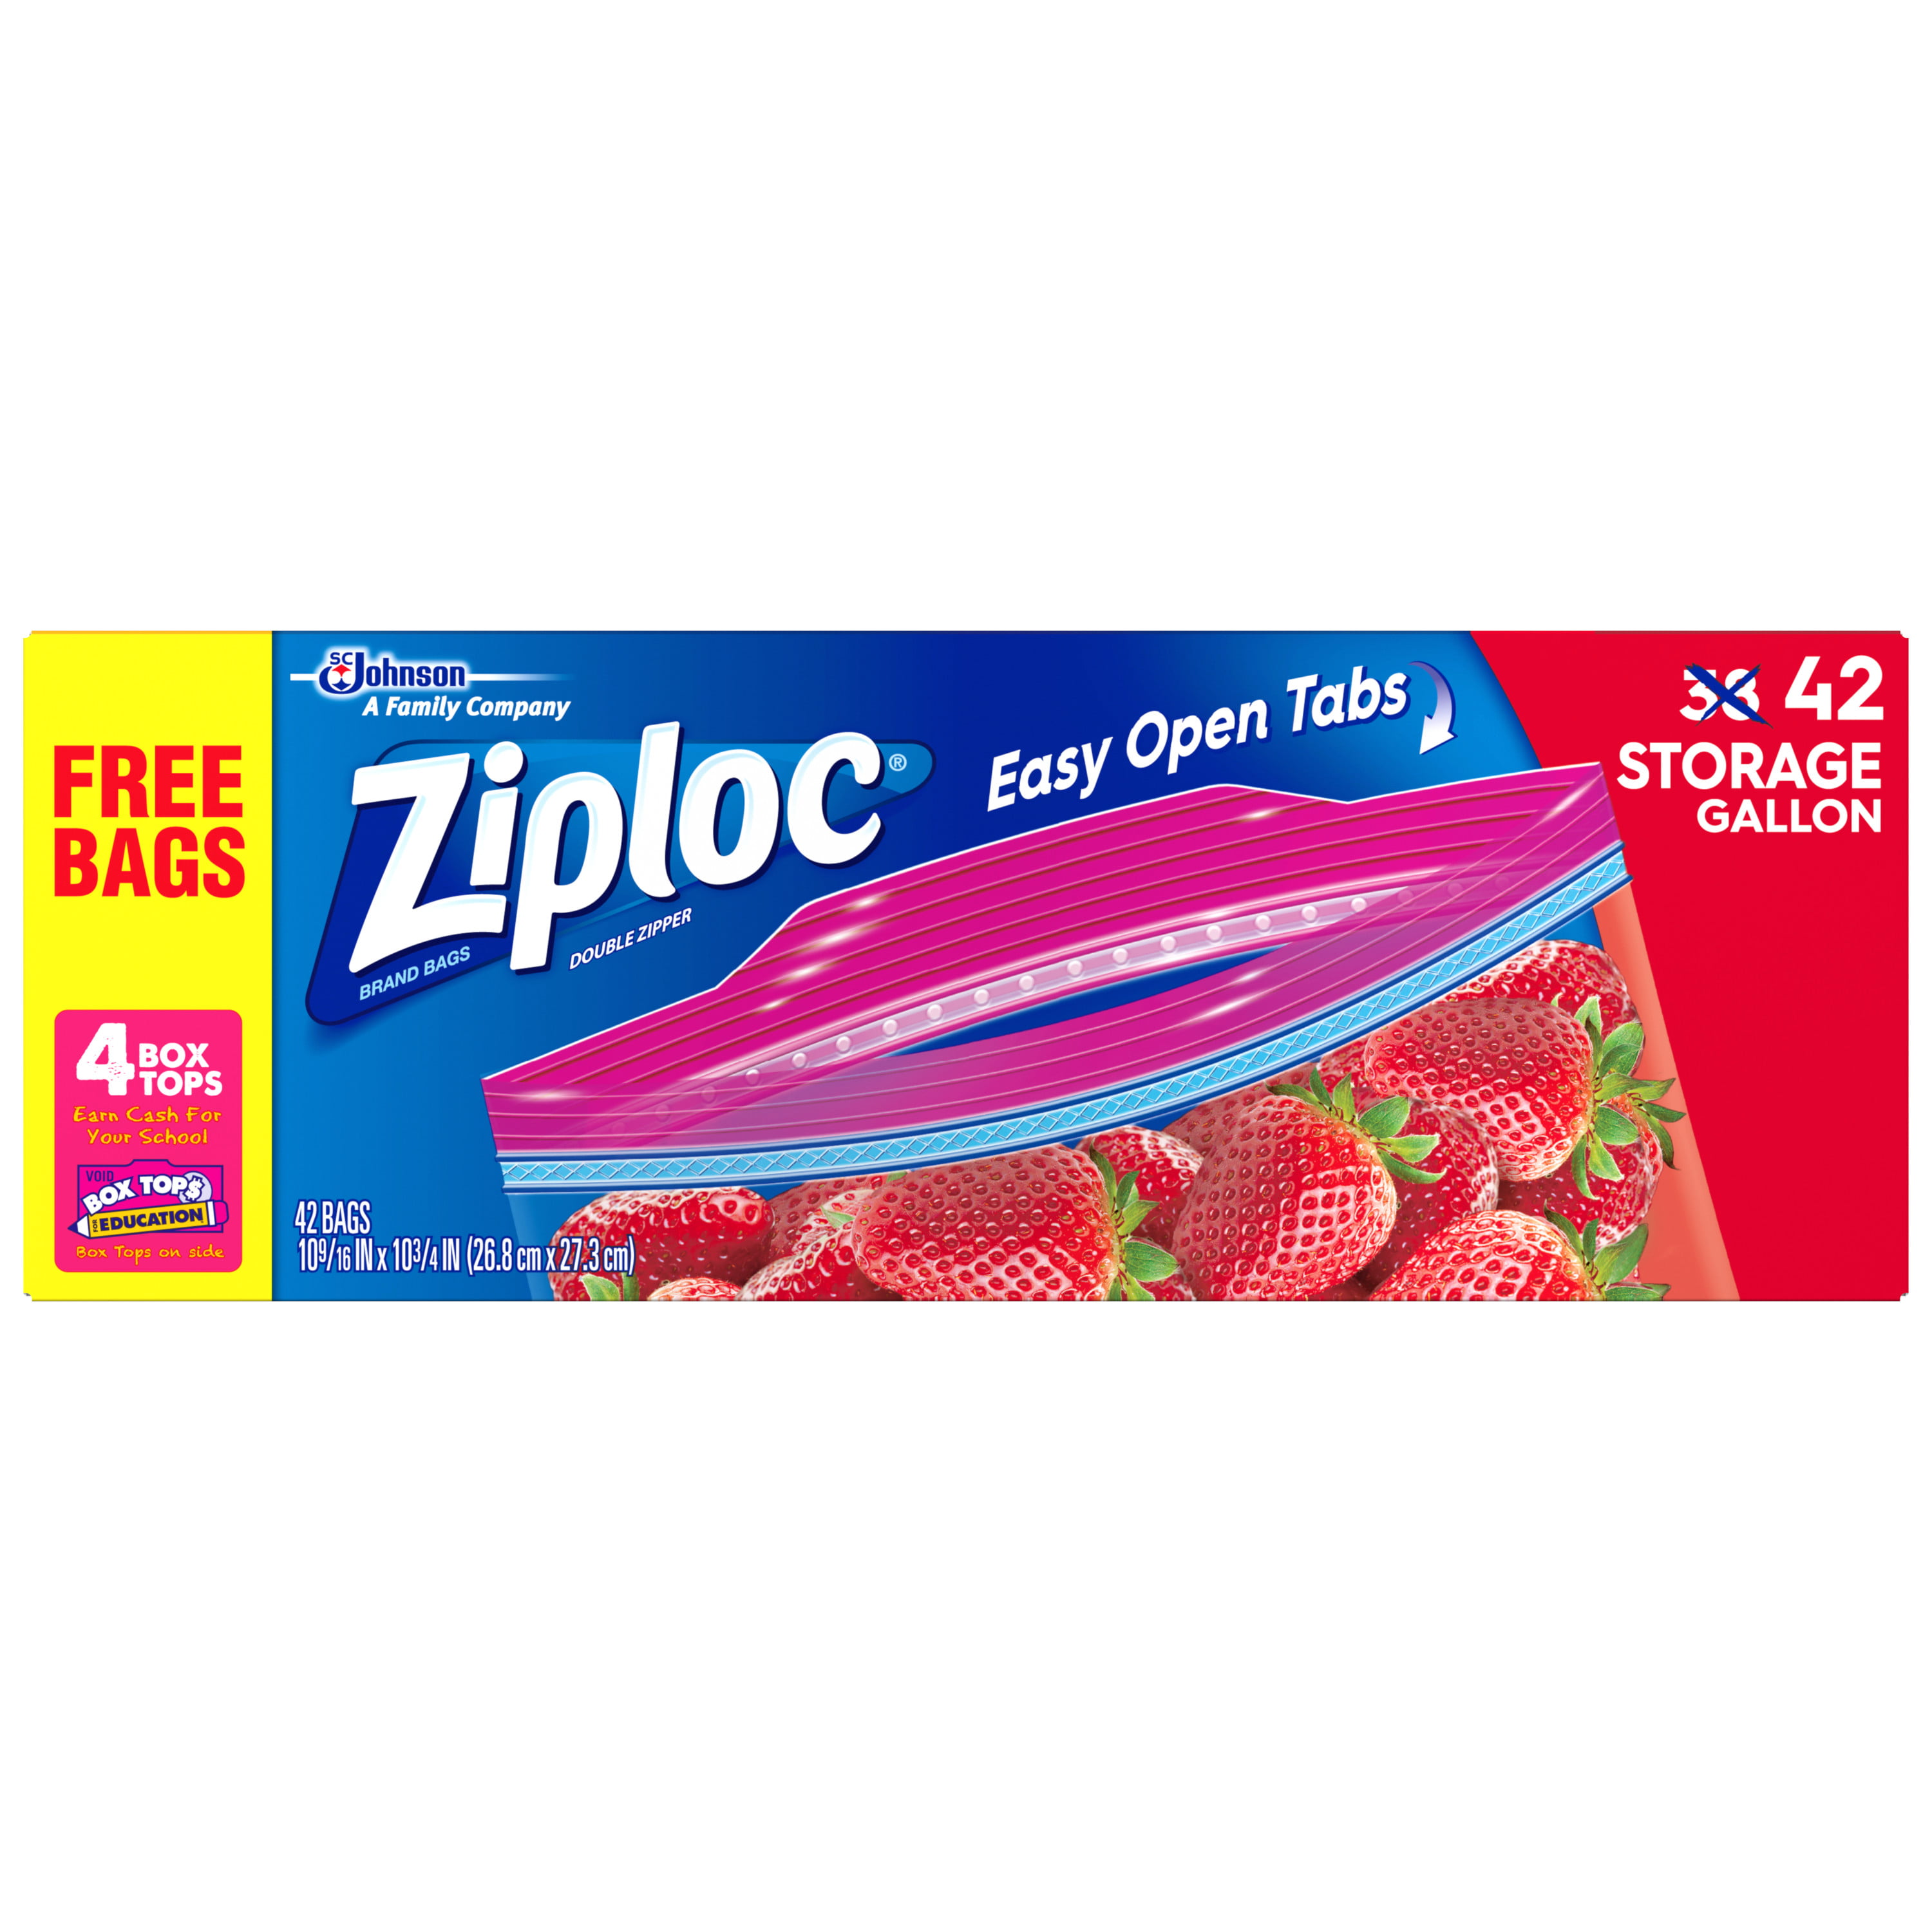 Packing for the Family with Ziploc bags